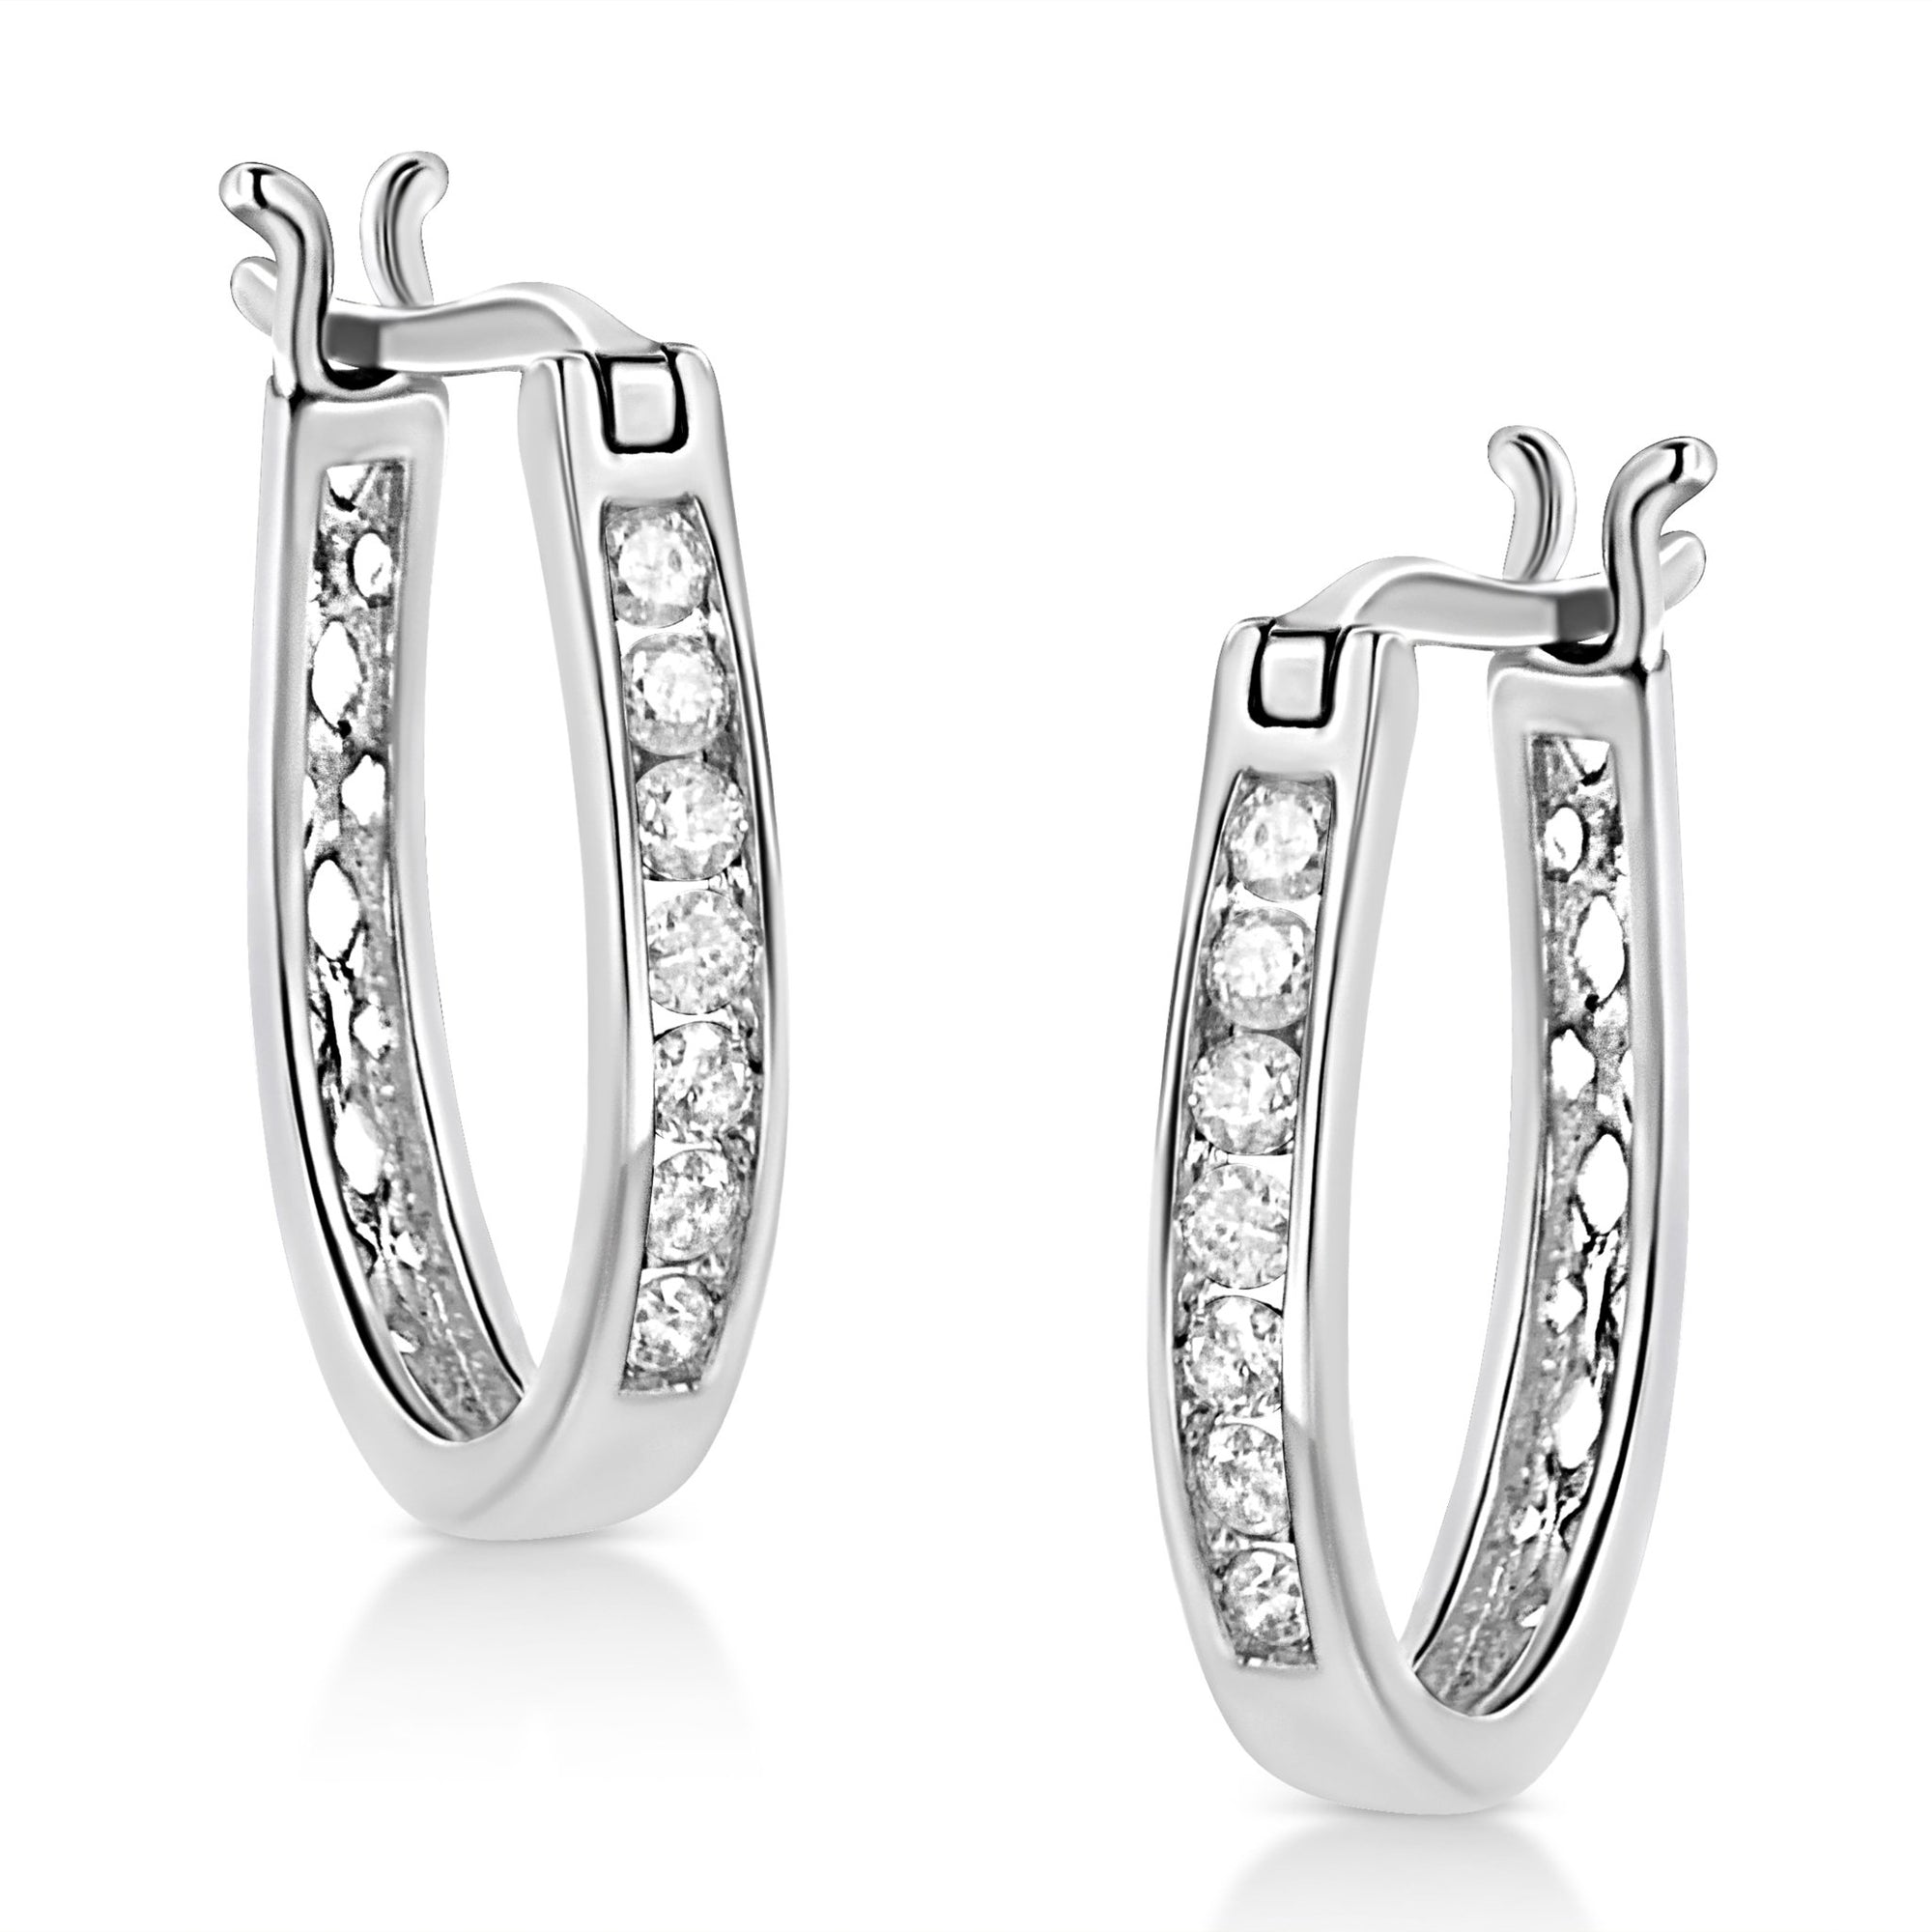 .925 Sterling Silver 1/4 Cttw Diamond Leverback 3/4" Inch Hoop Earrings (I-J Color, I2-I3 Clarity) - LinkagejewelrydesignLinkagejewelrydesign